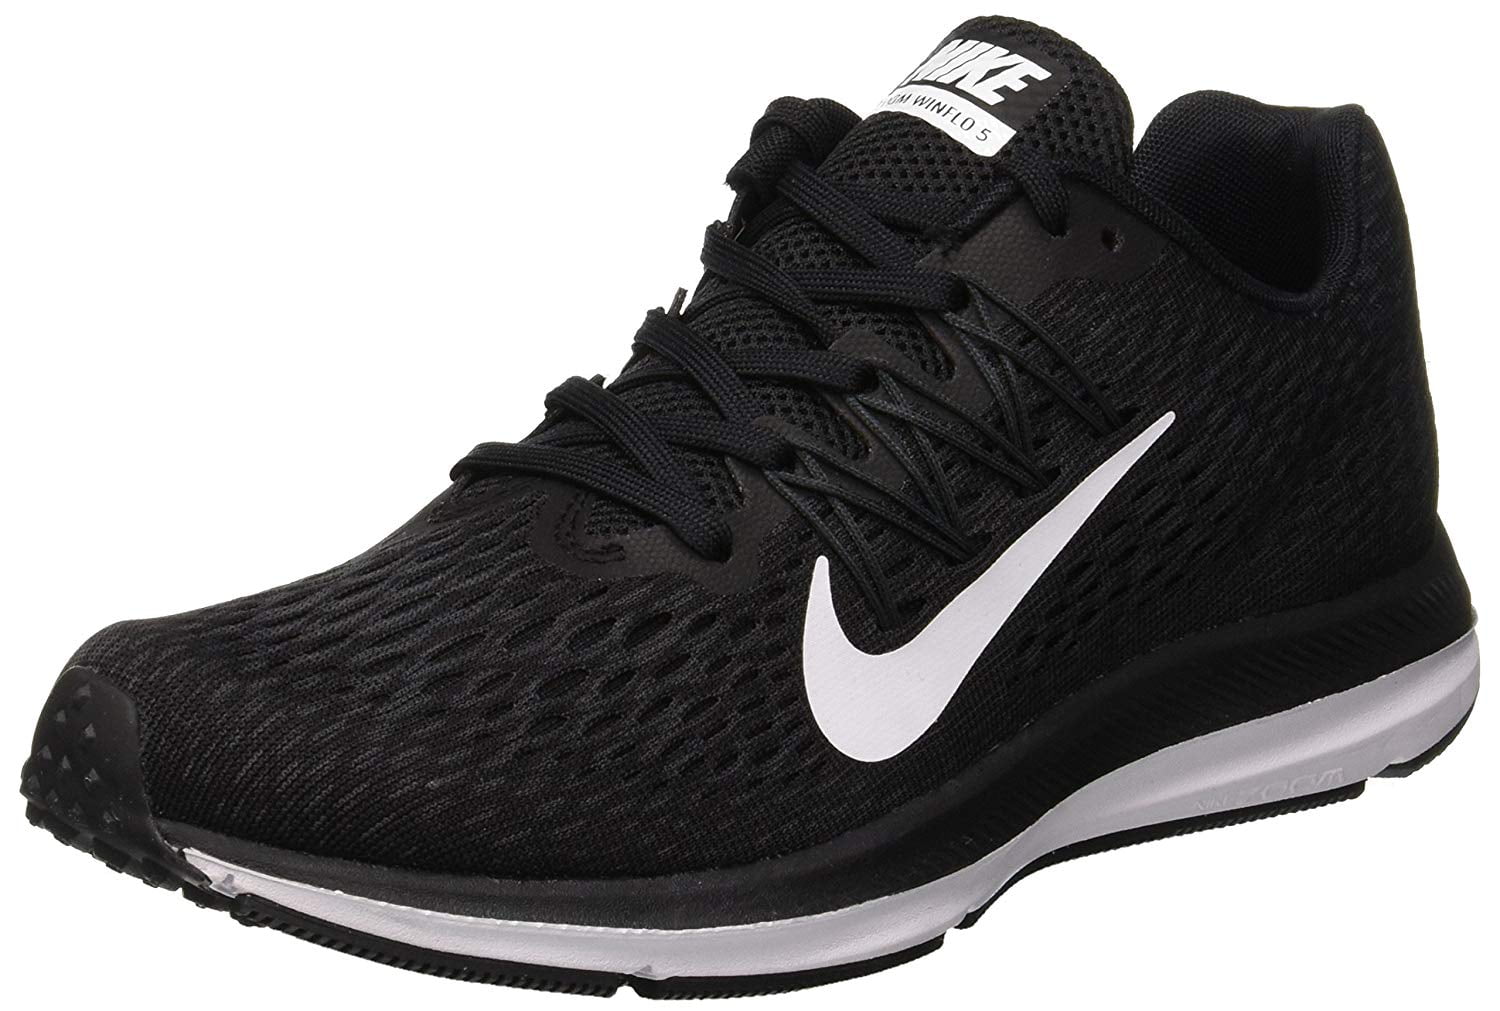 Air Zoom Winflo 5 Running Shoes Black 